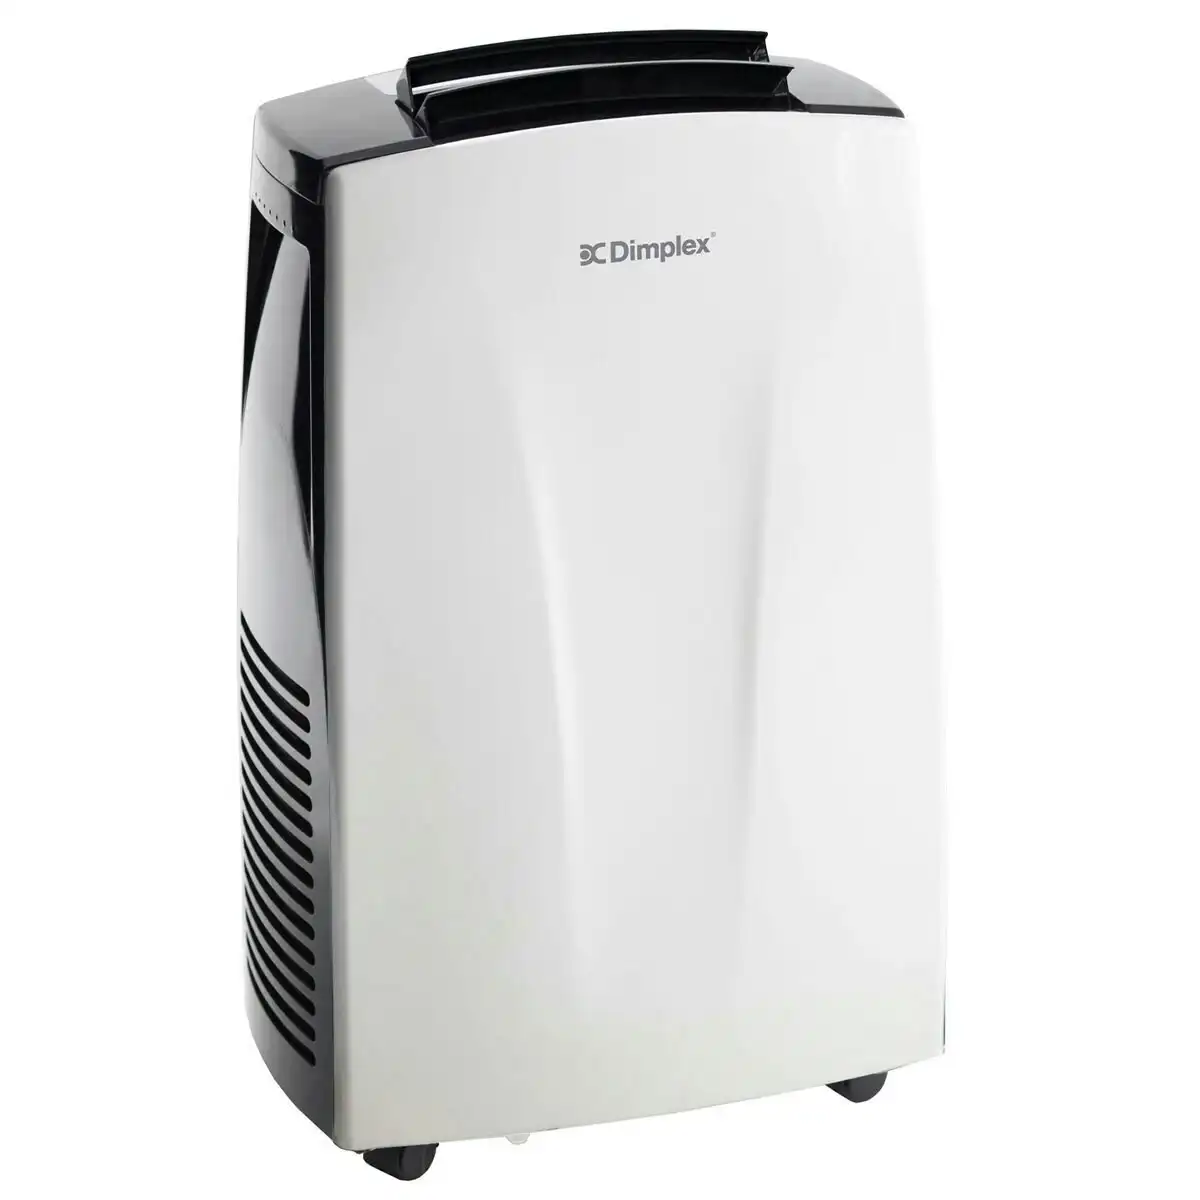 Dimplex 4.5KW Portable Air Conditioner with Dehumidifier